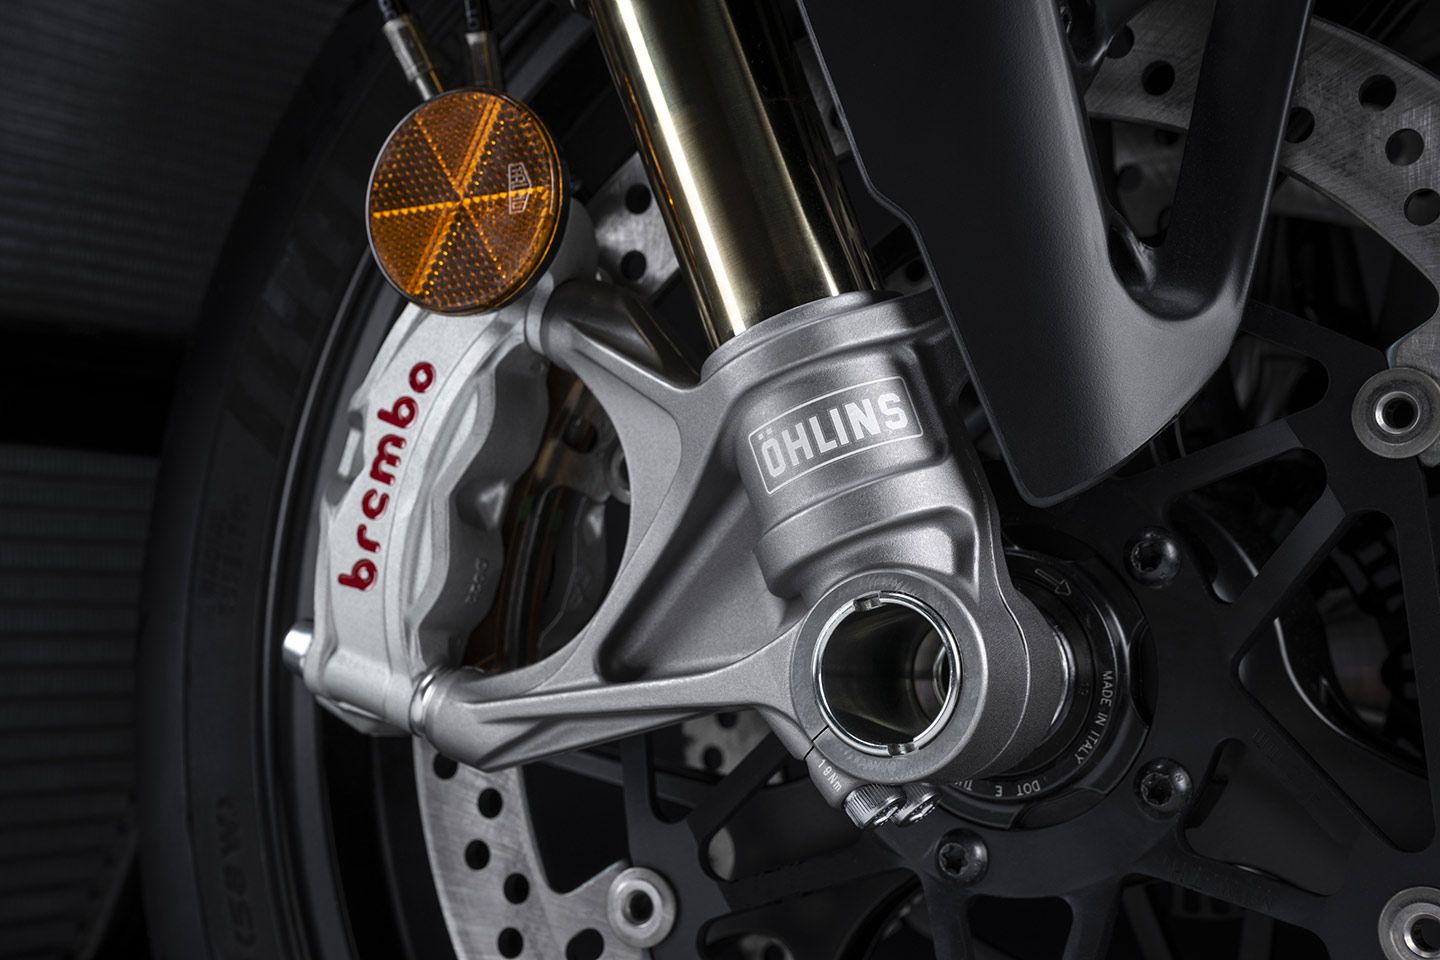 All Streetfighter V4 models come equipped with Brembo front brakes, though SP2 models are upgraded with the ever-impressive Stylema R calipers.